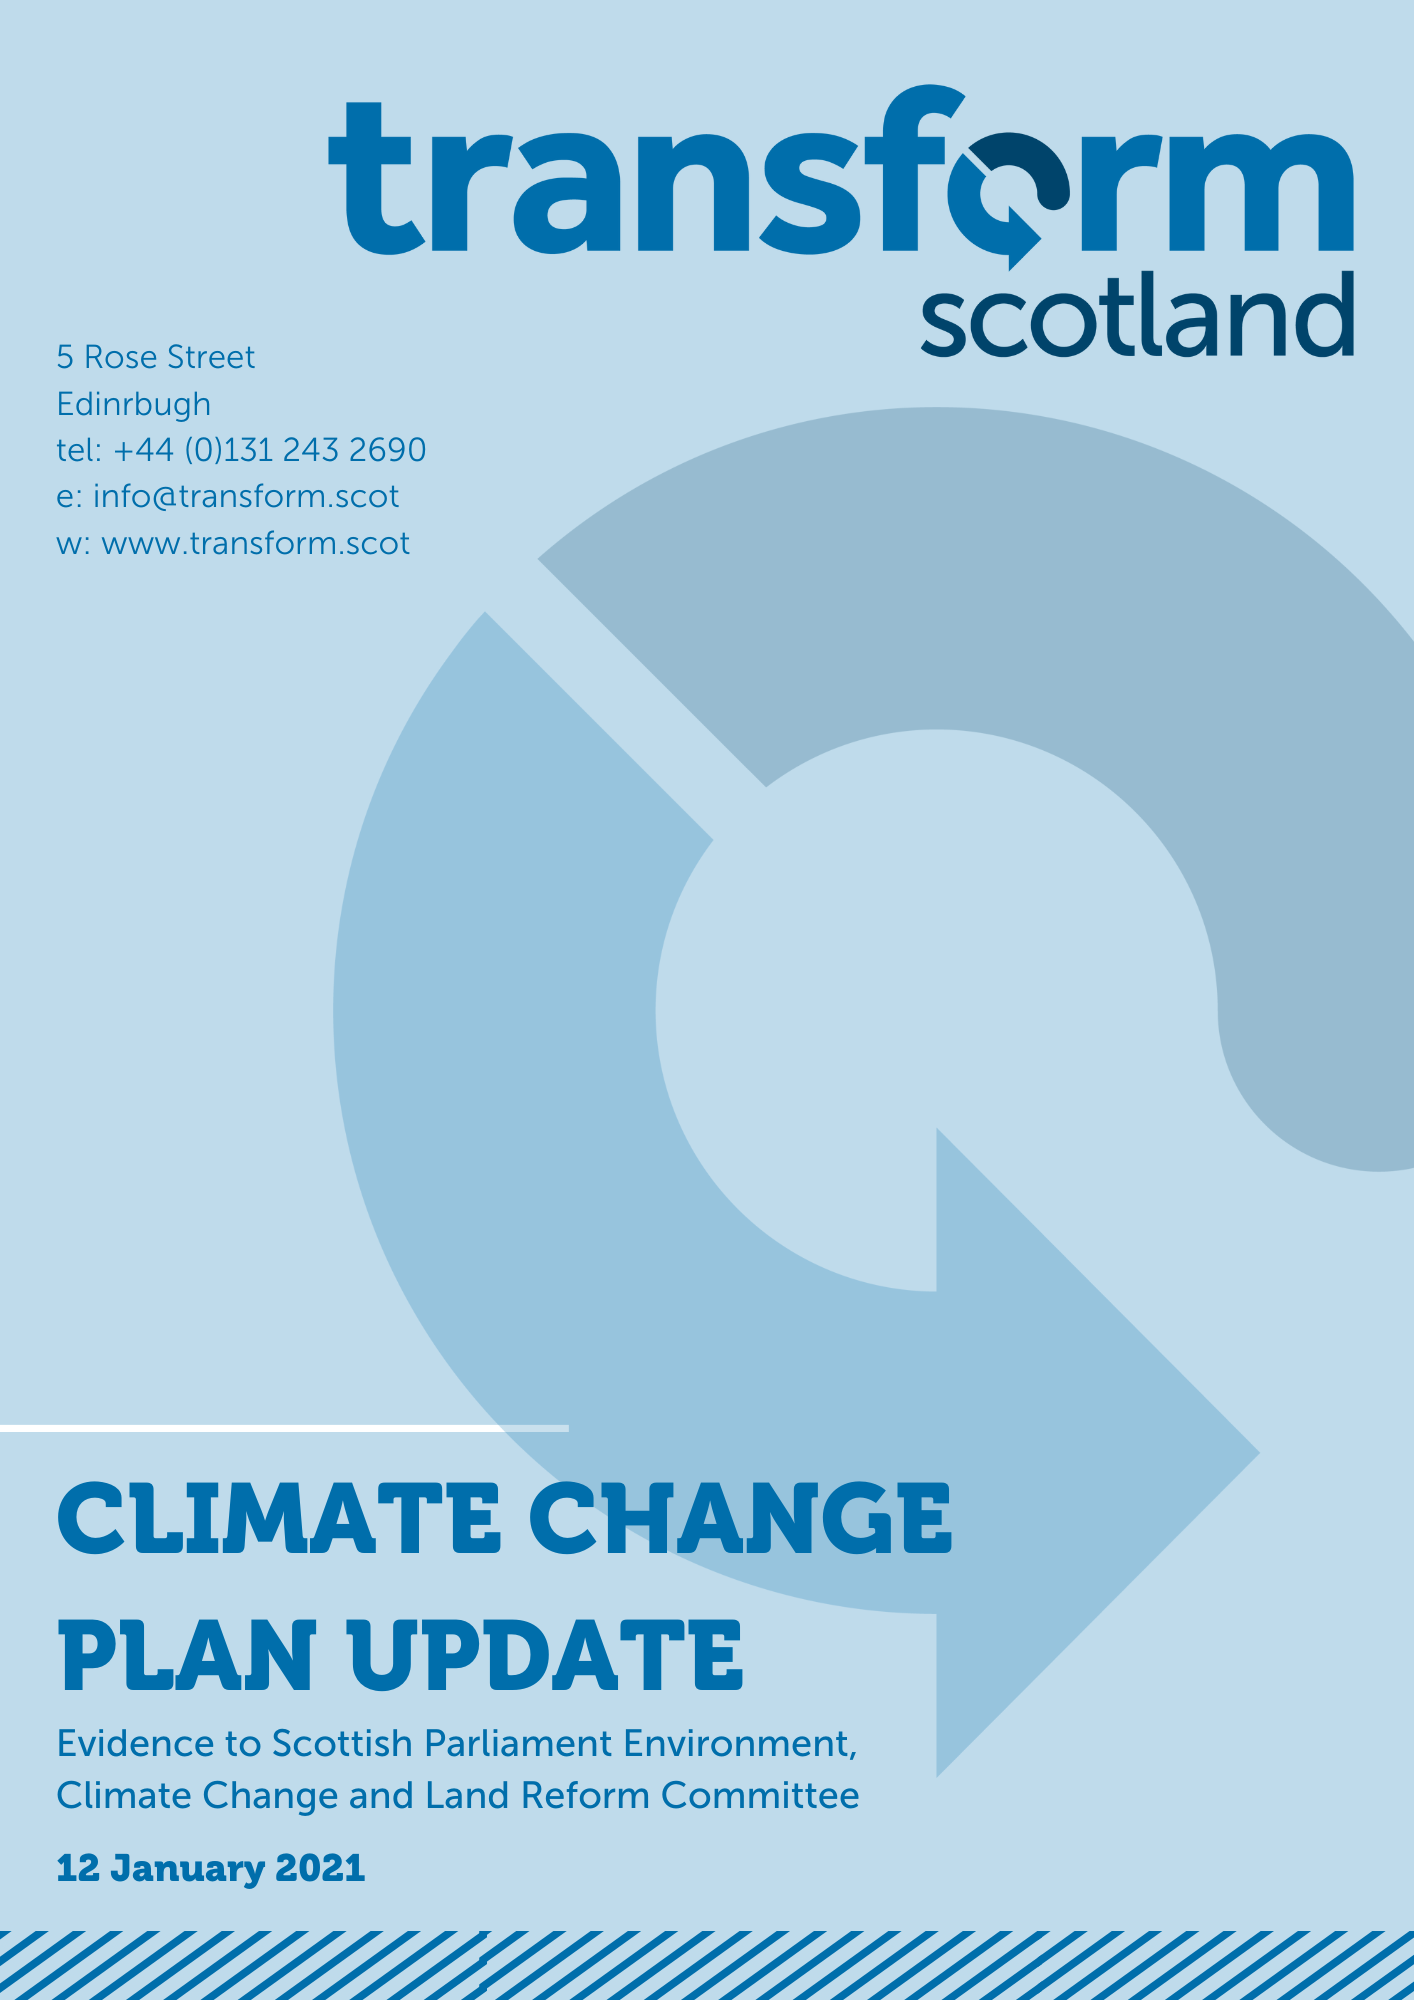 Evidence to the Scottish Parliament ECCLR Committee on the Climate Change Plan update